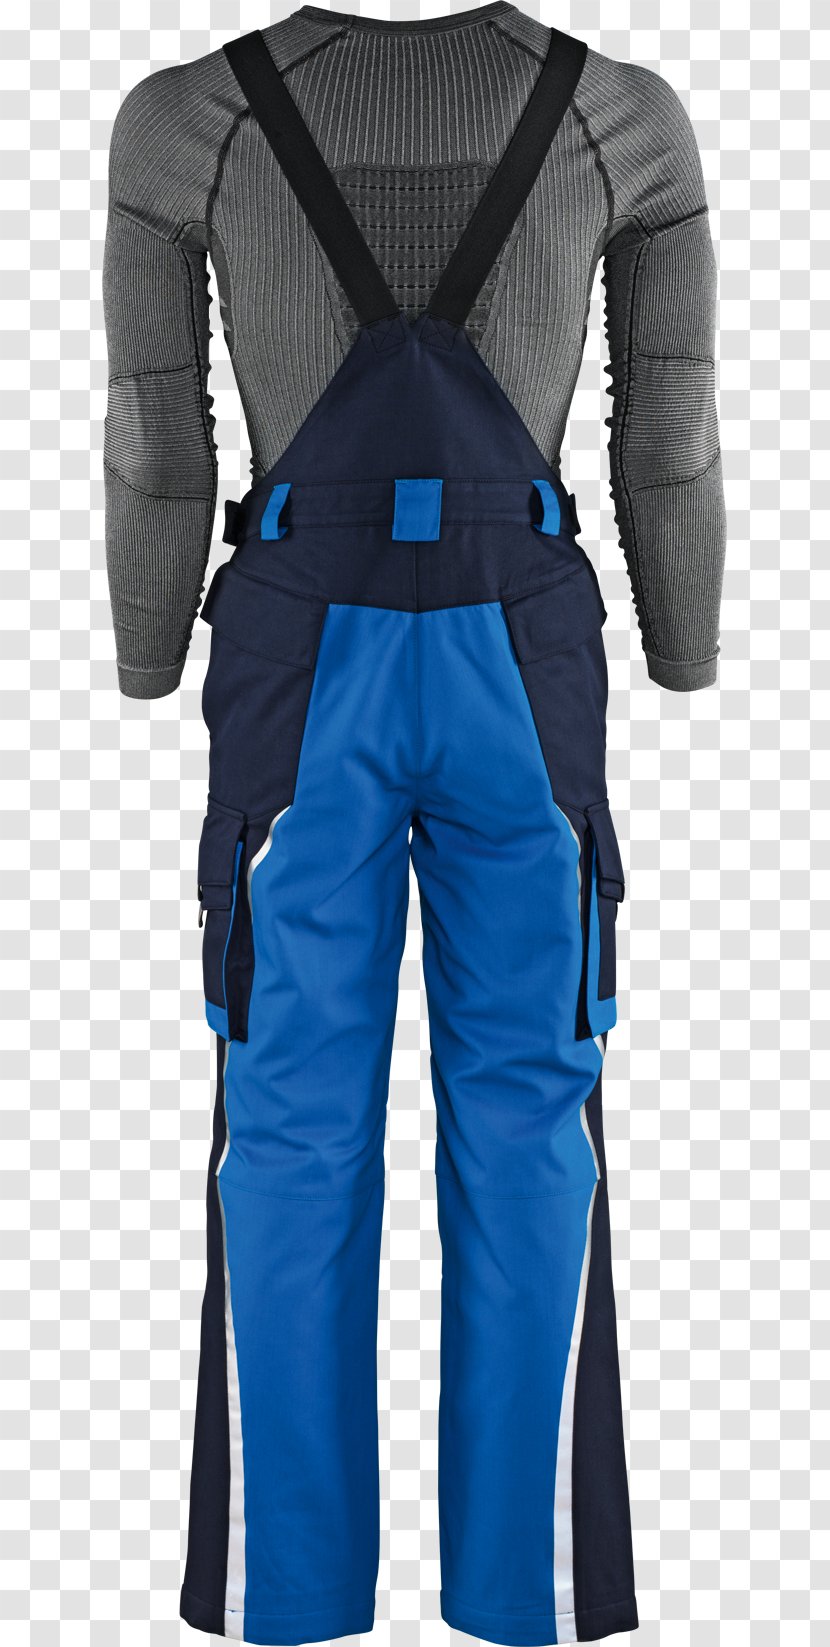 Dry Suit Hockey Protective Pants & Ski Shorts Overall - Flash Material Transparent PNG